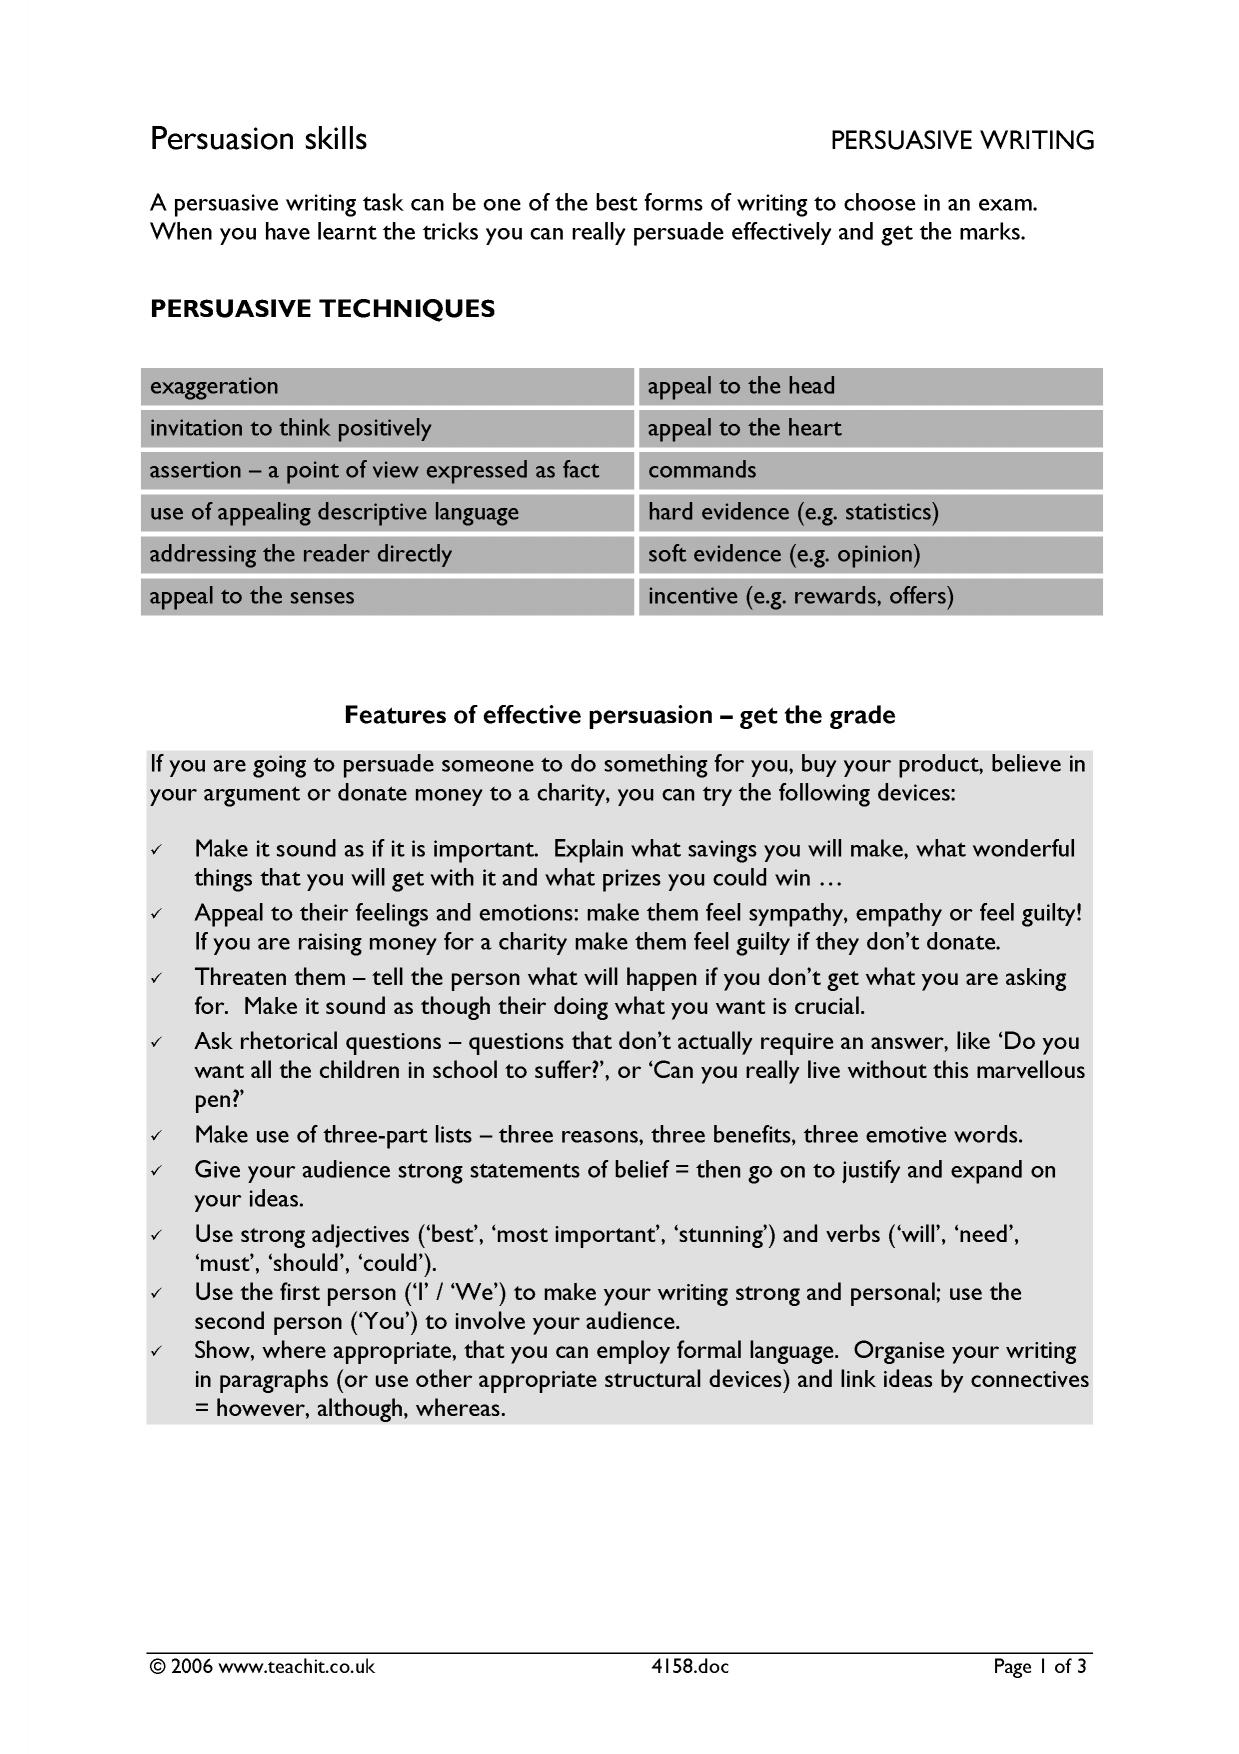 How to write body paragraphs for an argumentative essay graphic organizer for 5 paragraph essays writing argumentative essays powerpoint problem solving research paper topics professional business plan writers critical thinking tests free download paper recycling business plan in india internship reflective essay interesting term paper topics.